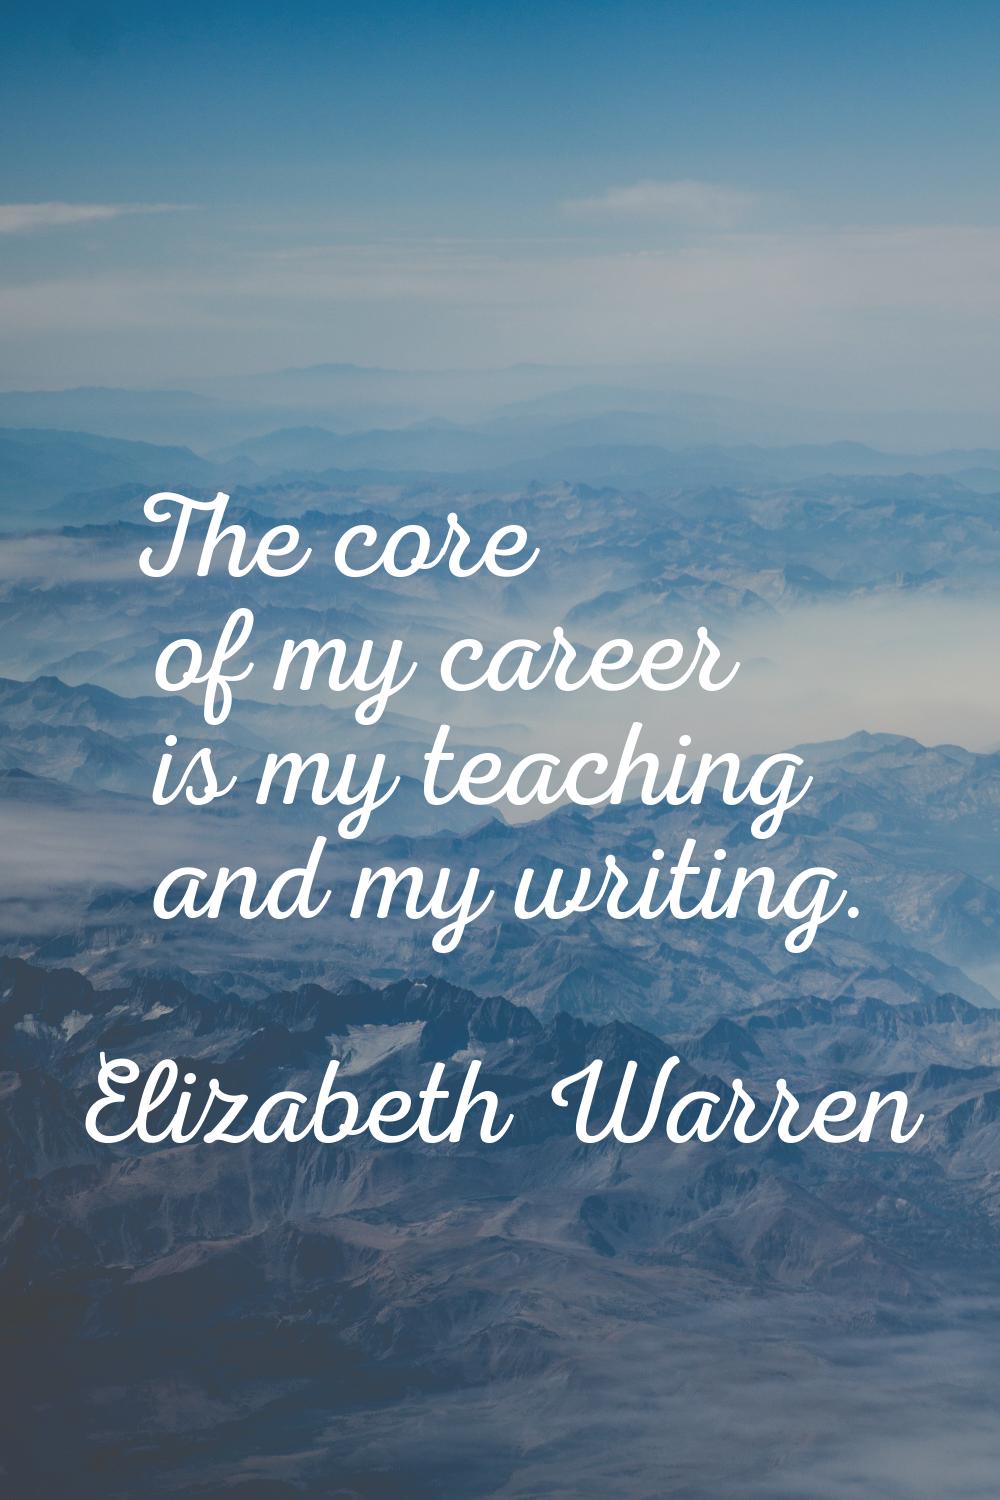 The core of my career is my teaching and my writing.